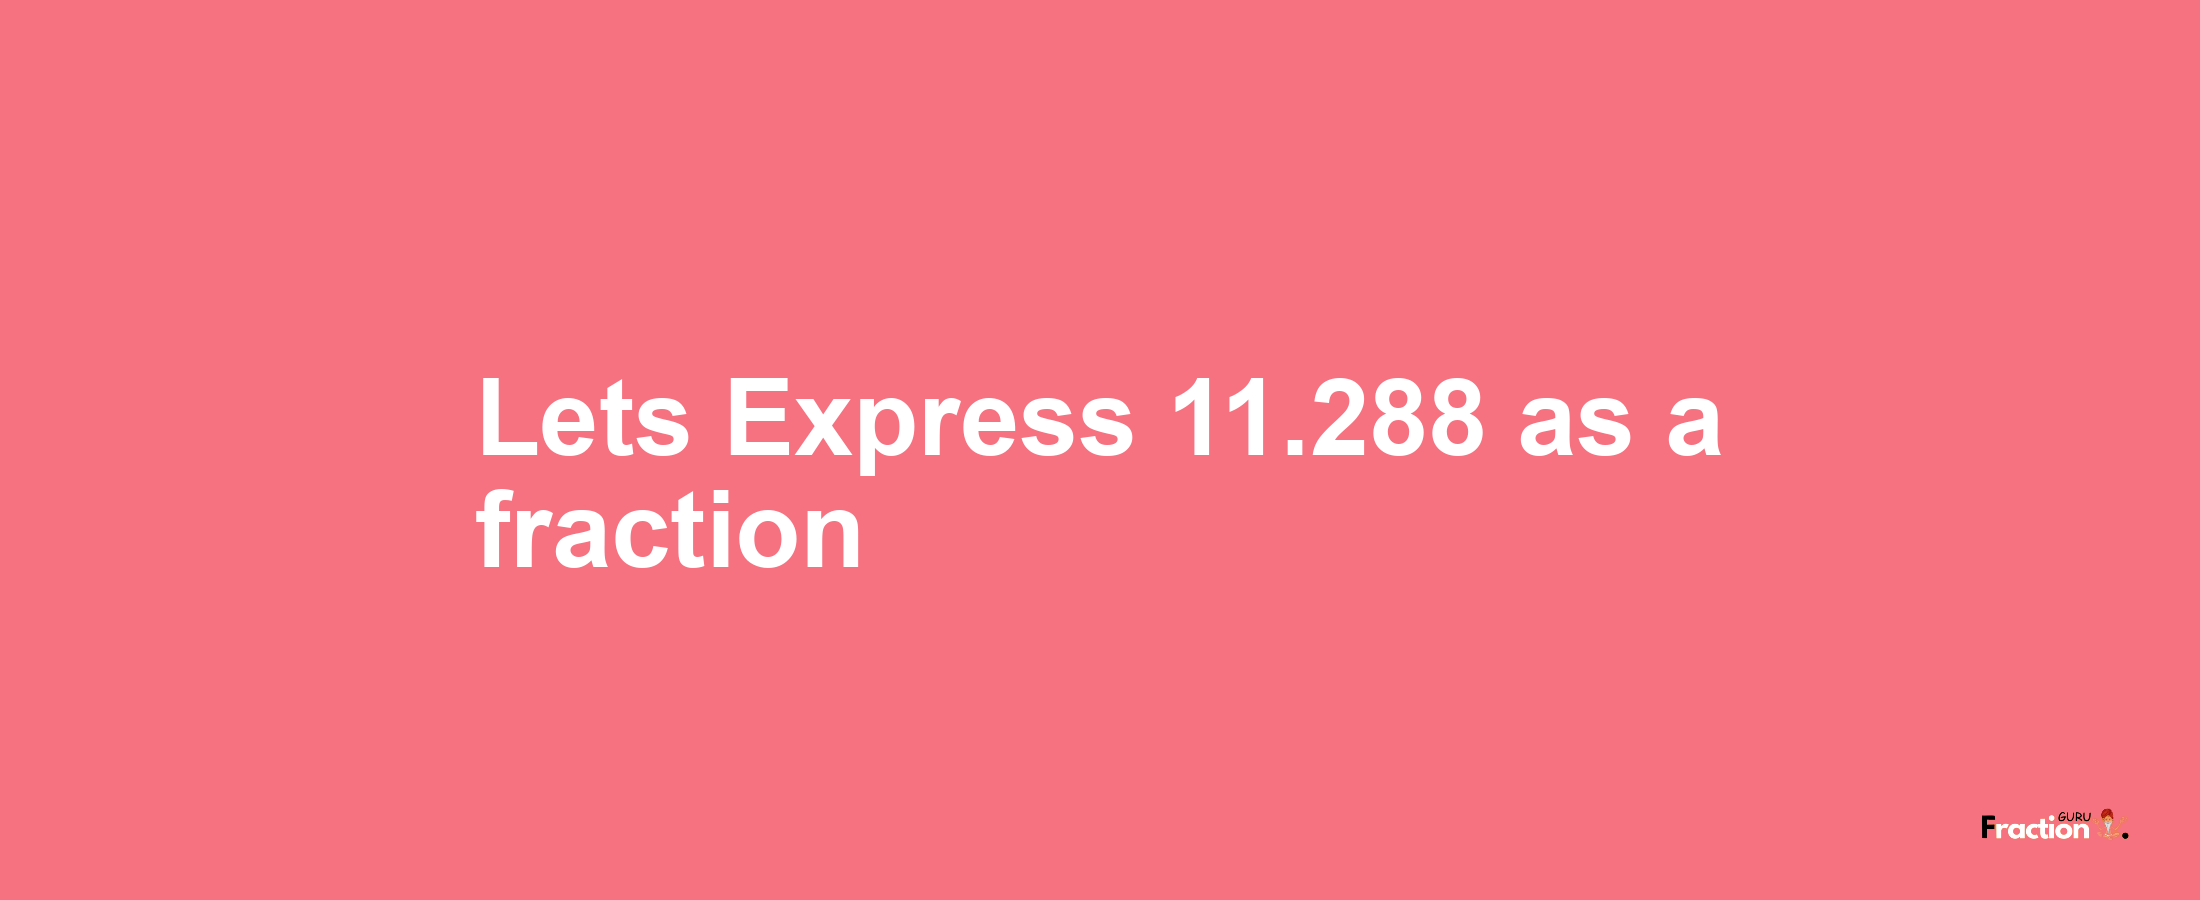 Lets Express 11.288 as afraction